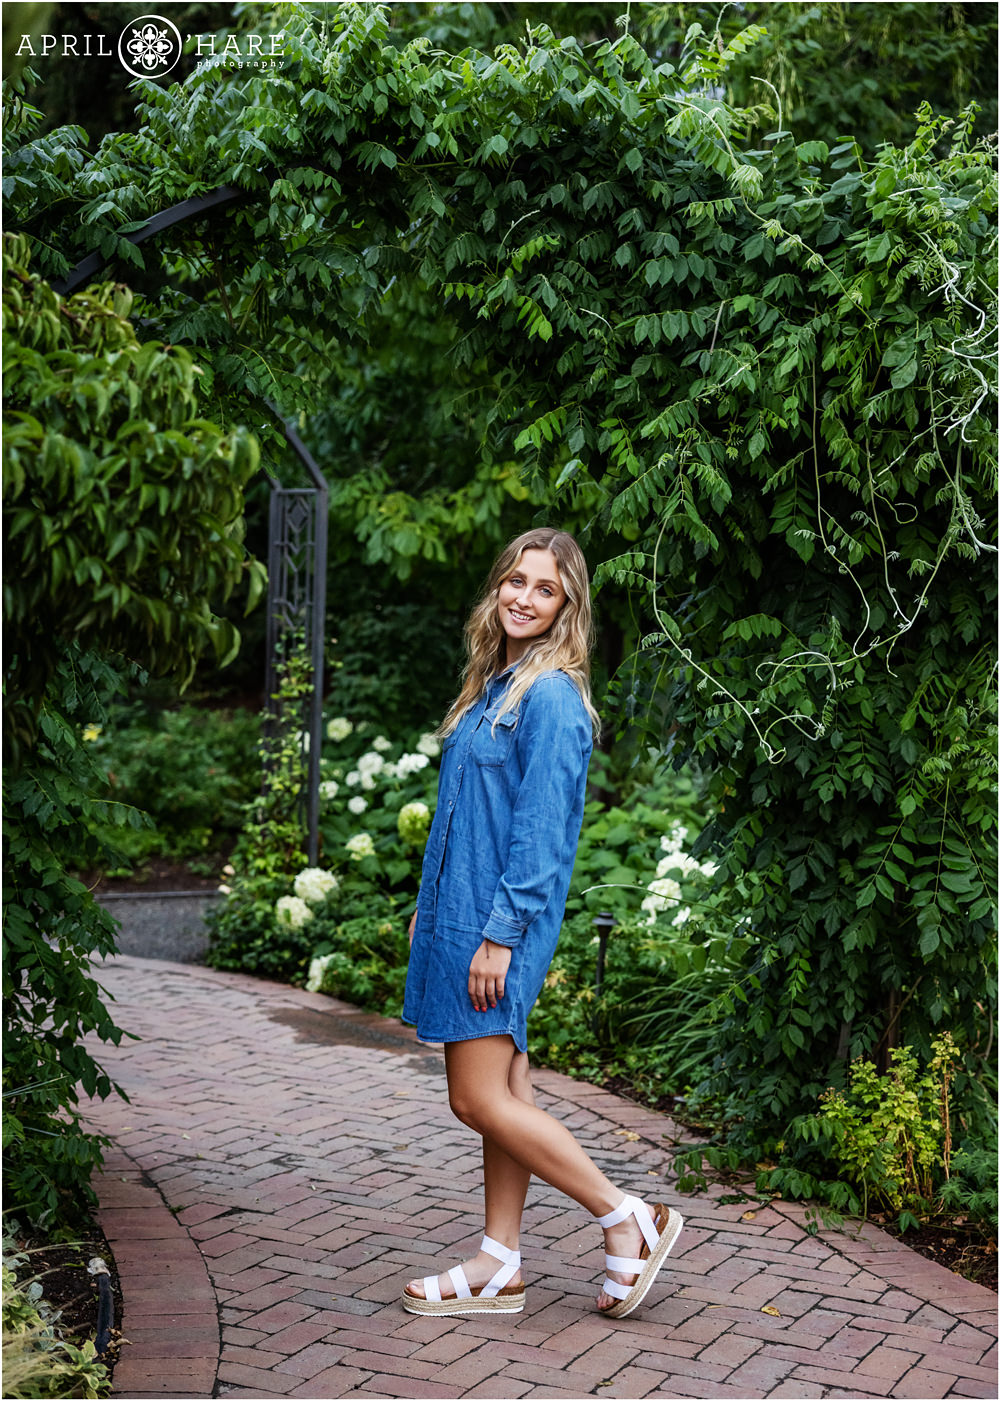 A senior girl wearing a blue chambray shirtdress with a green archway at Denver Botanic Gardens in Colorado